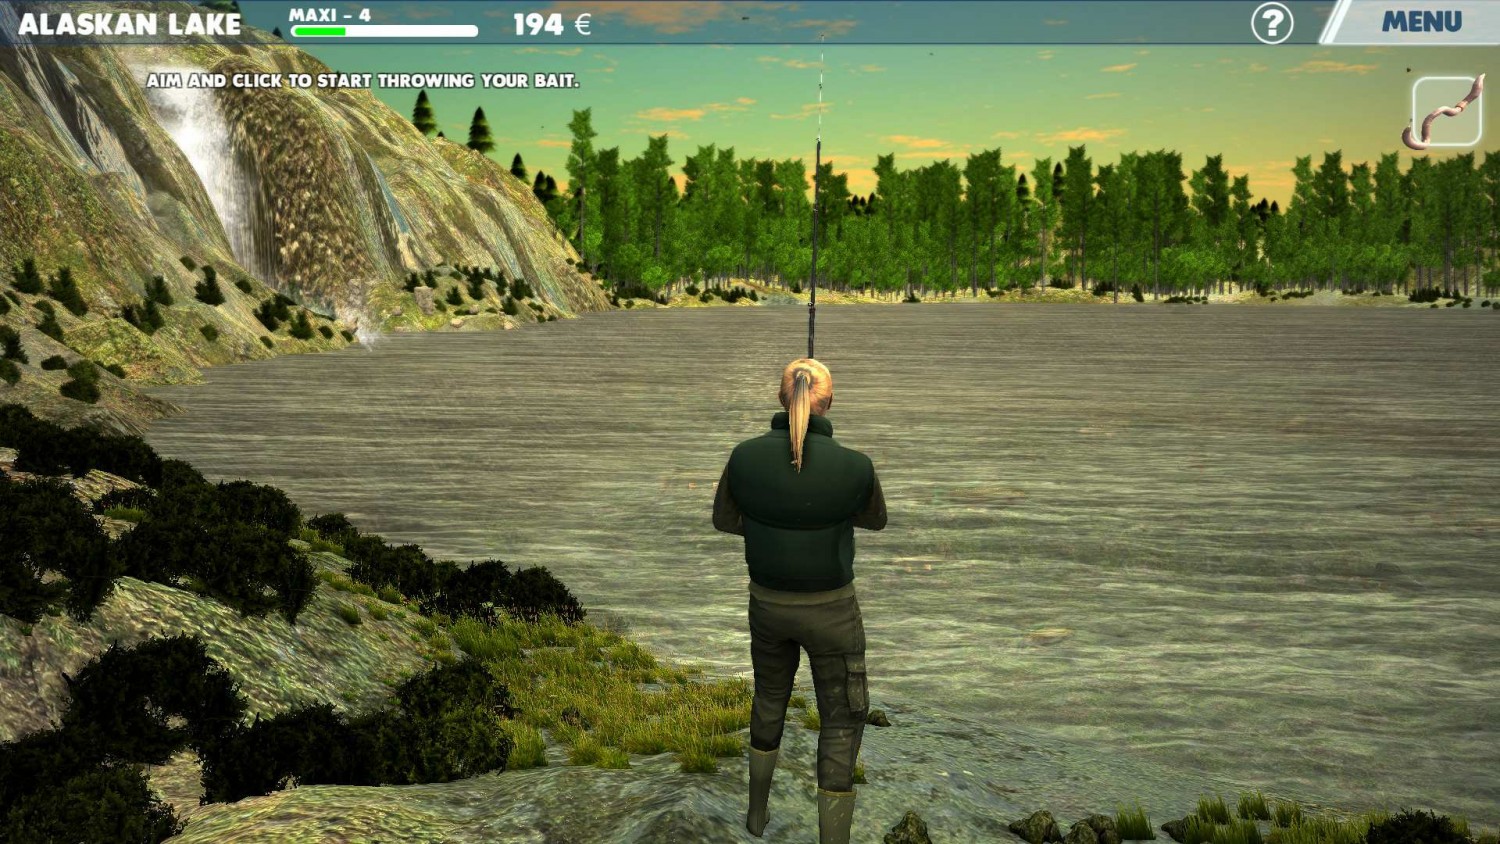 download the last version for apple Arcade Fishing